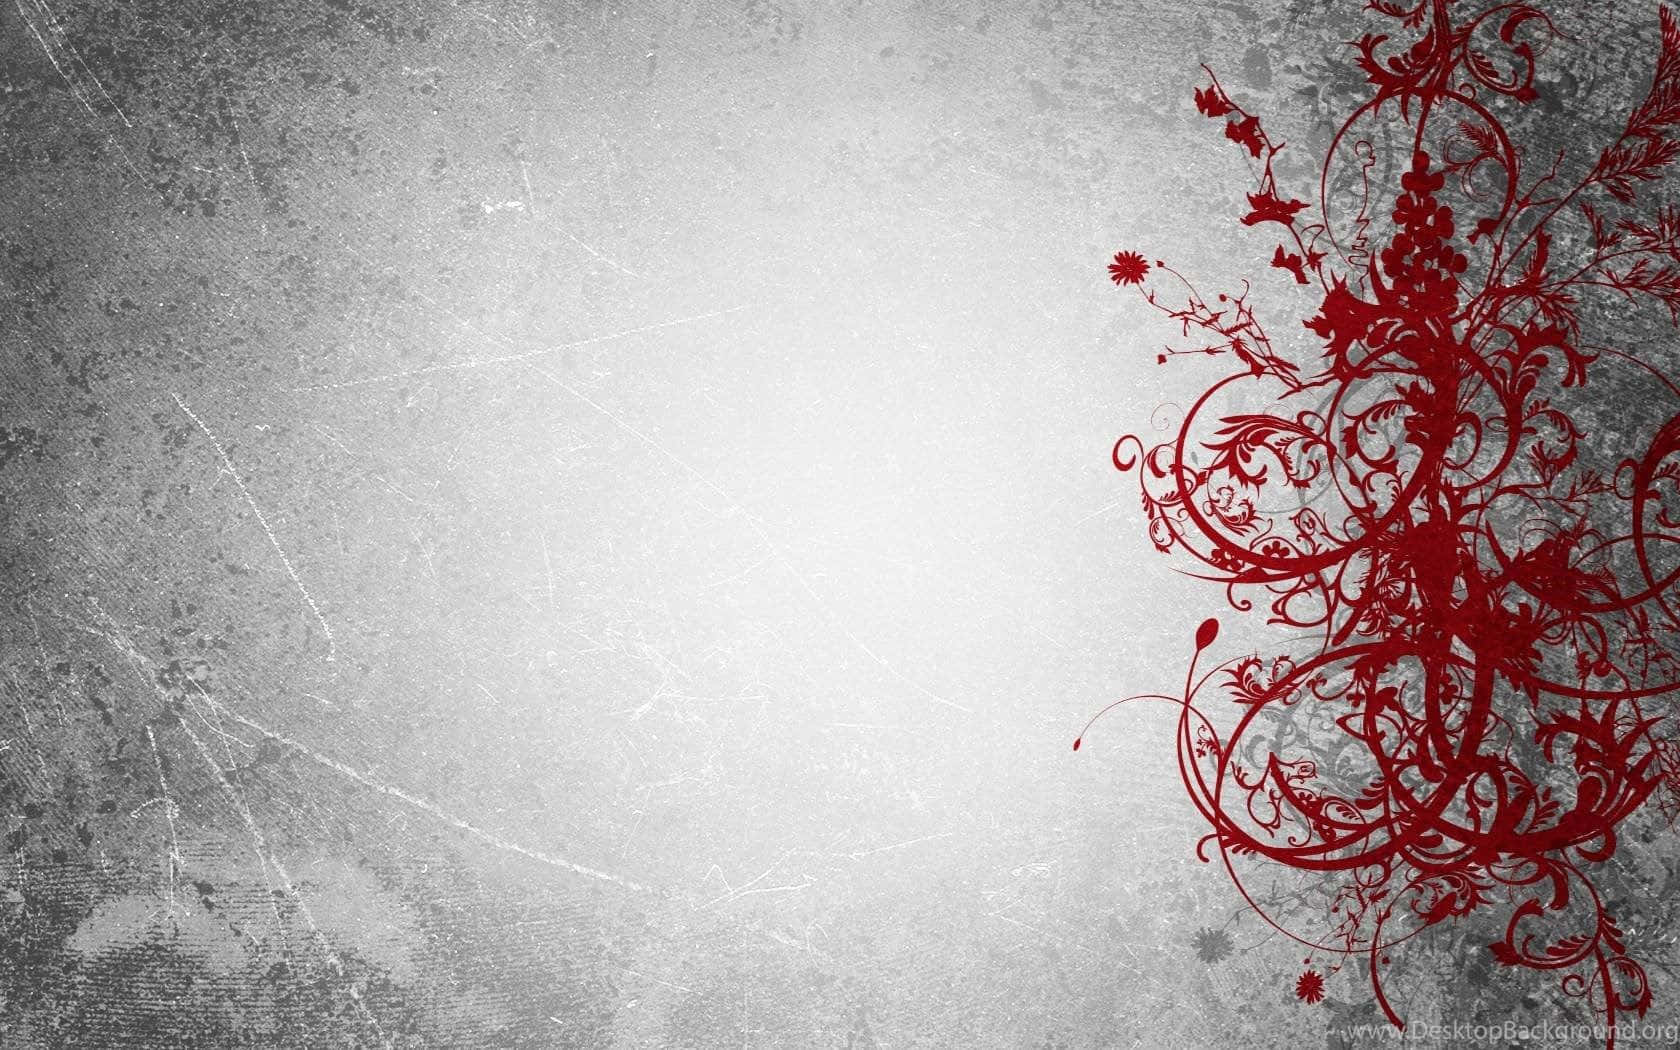 A Bloody Background With Red And White Flowers